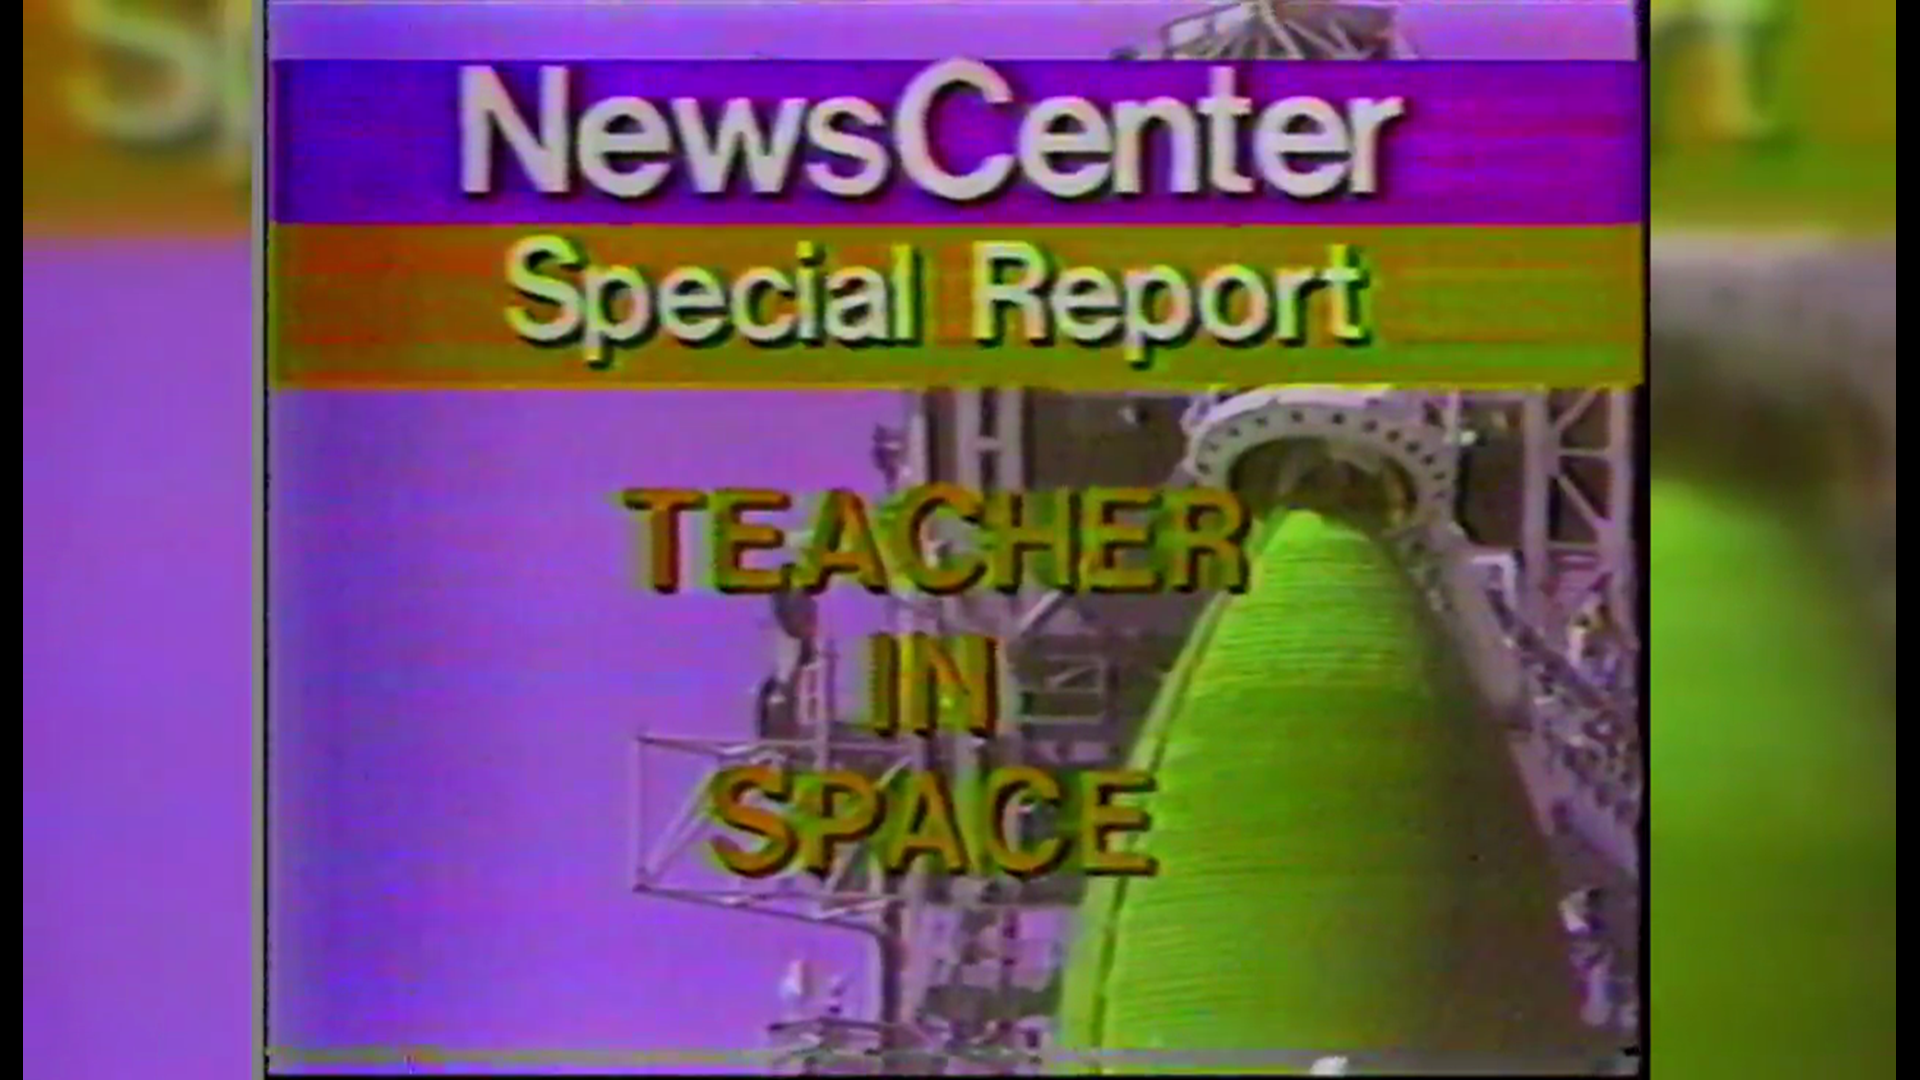 NewsCenter Special Report: 'Teacher in Space,' 1986 Challenger disaster coverage - Jan. 28, 1986